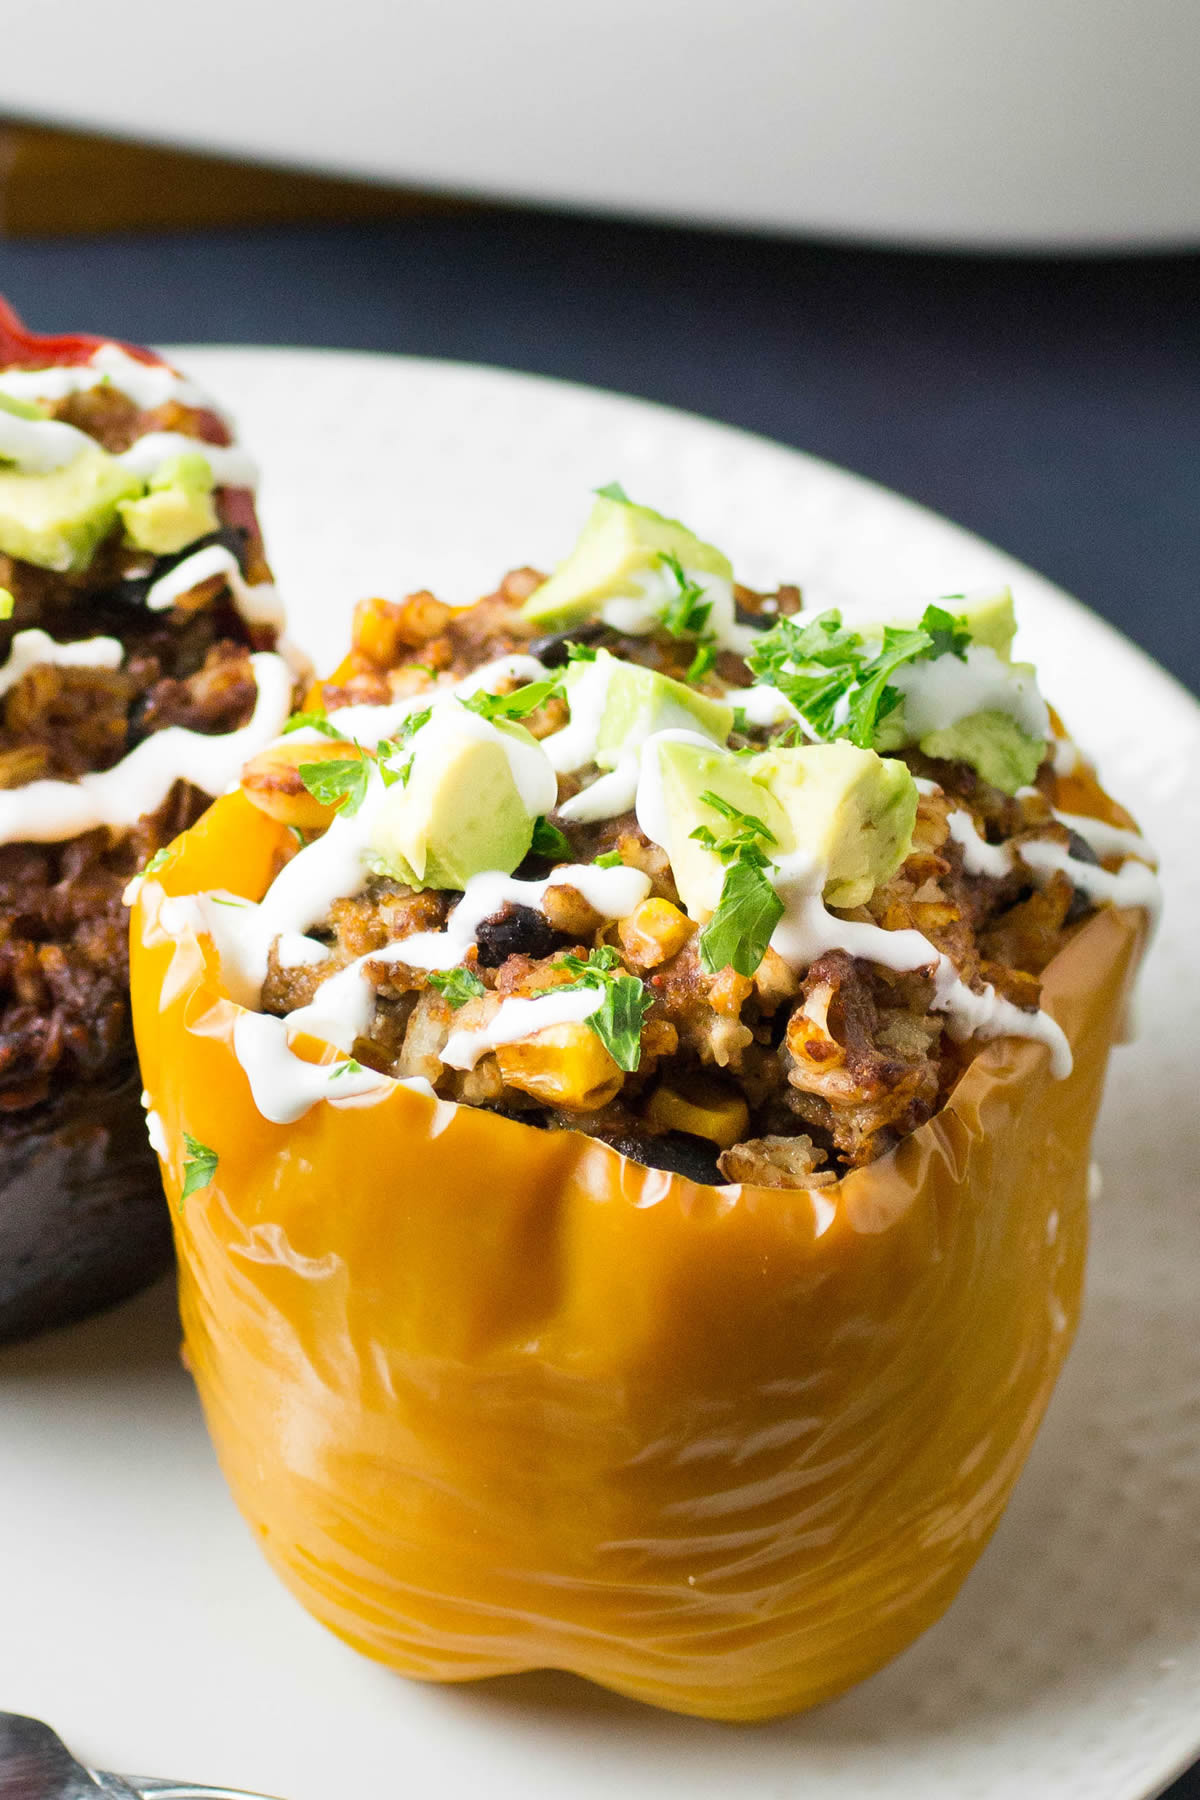 Mexican Crock Pot Recipes
 Crock Pot Stuffed Peppers – Mexican Style Recipe Chili